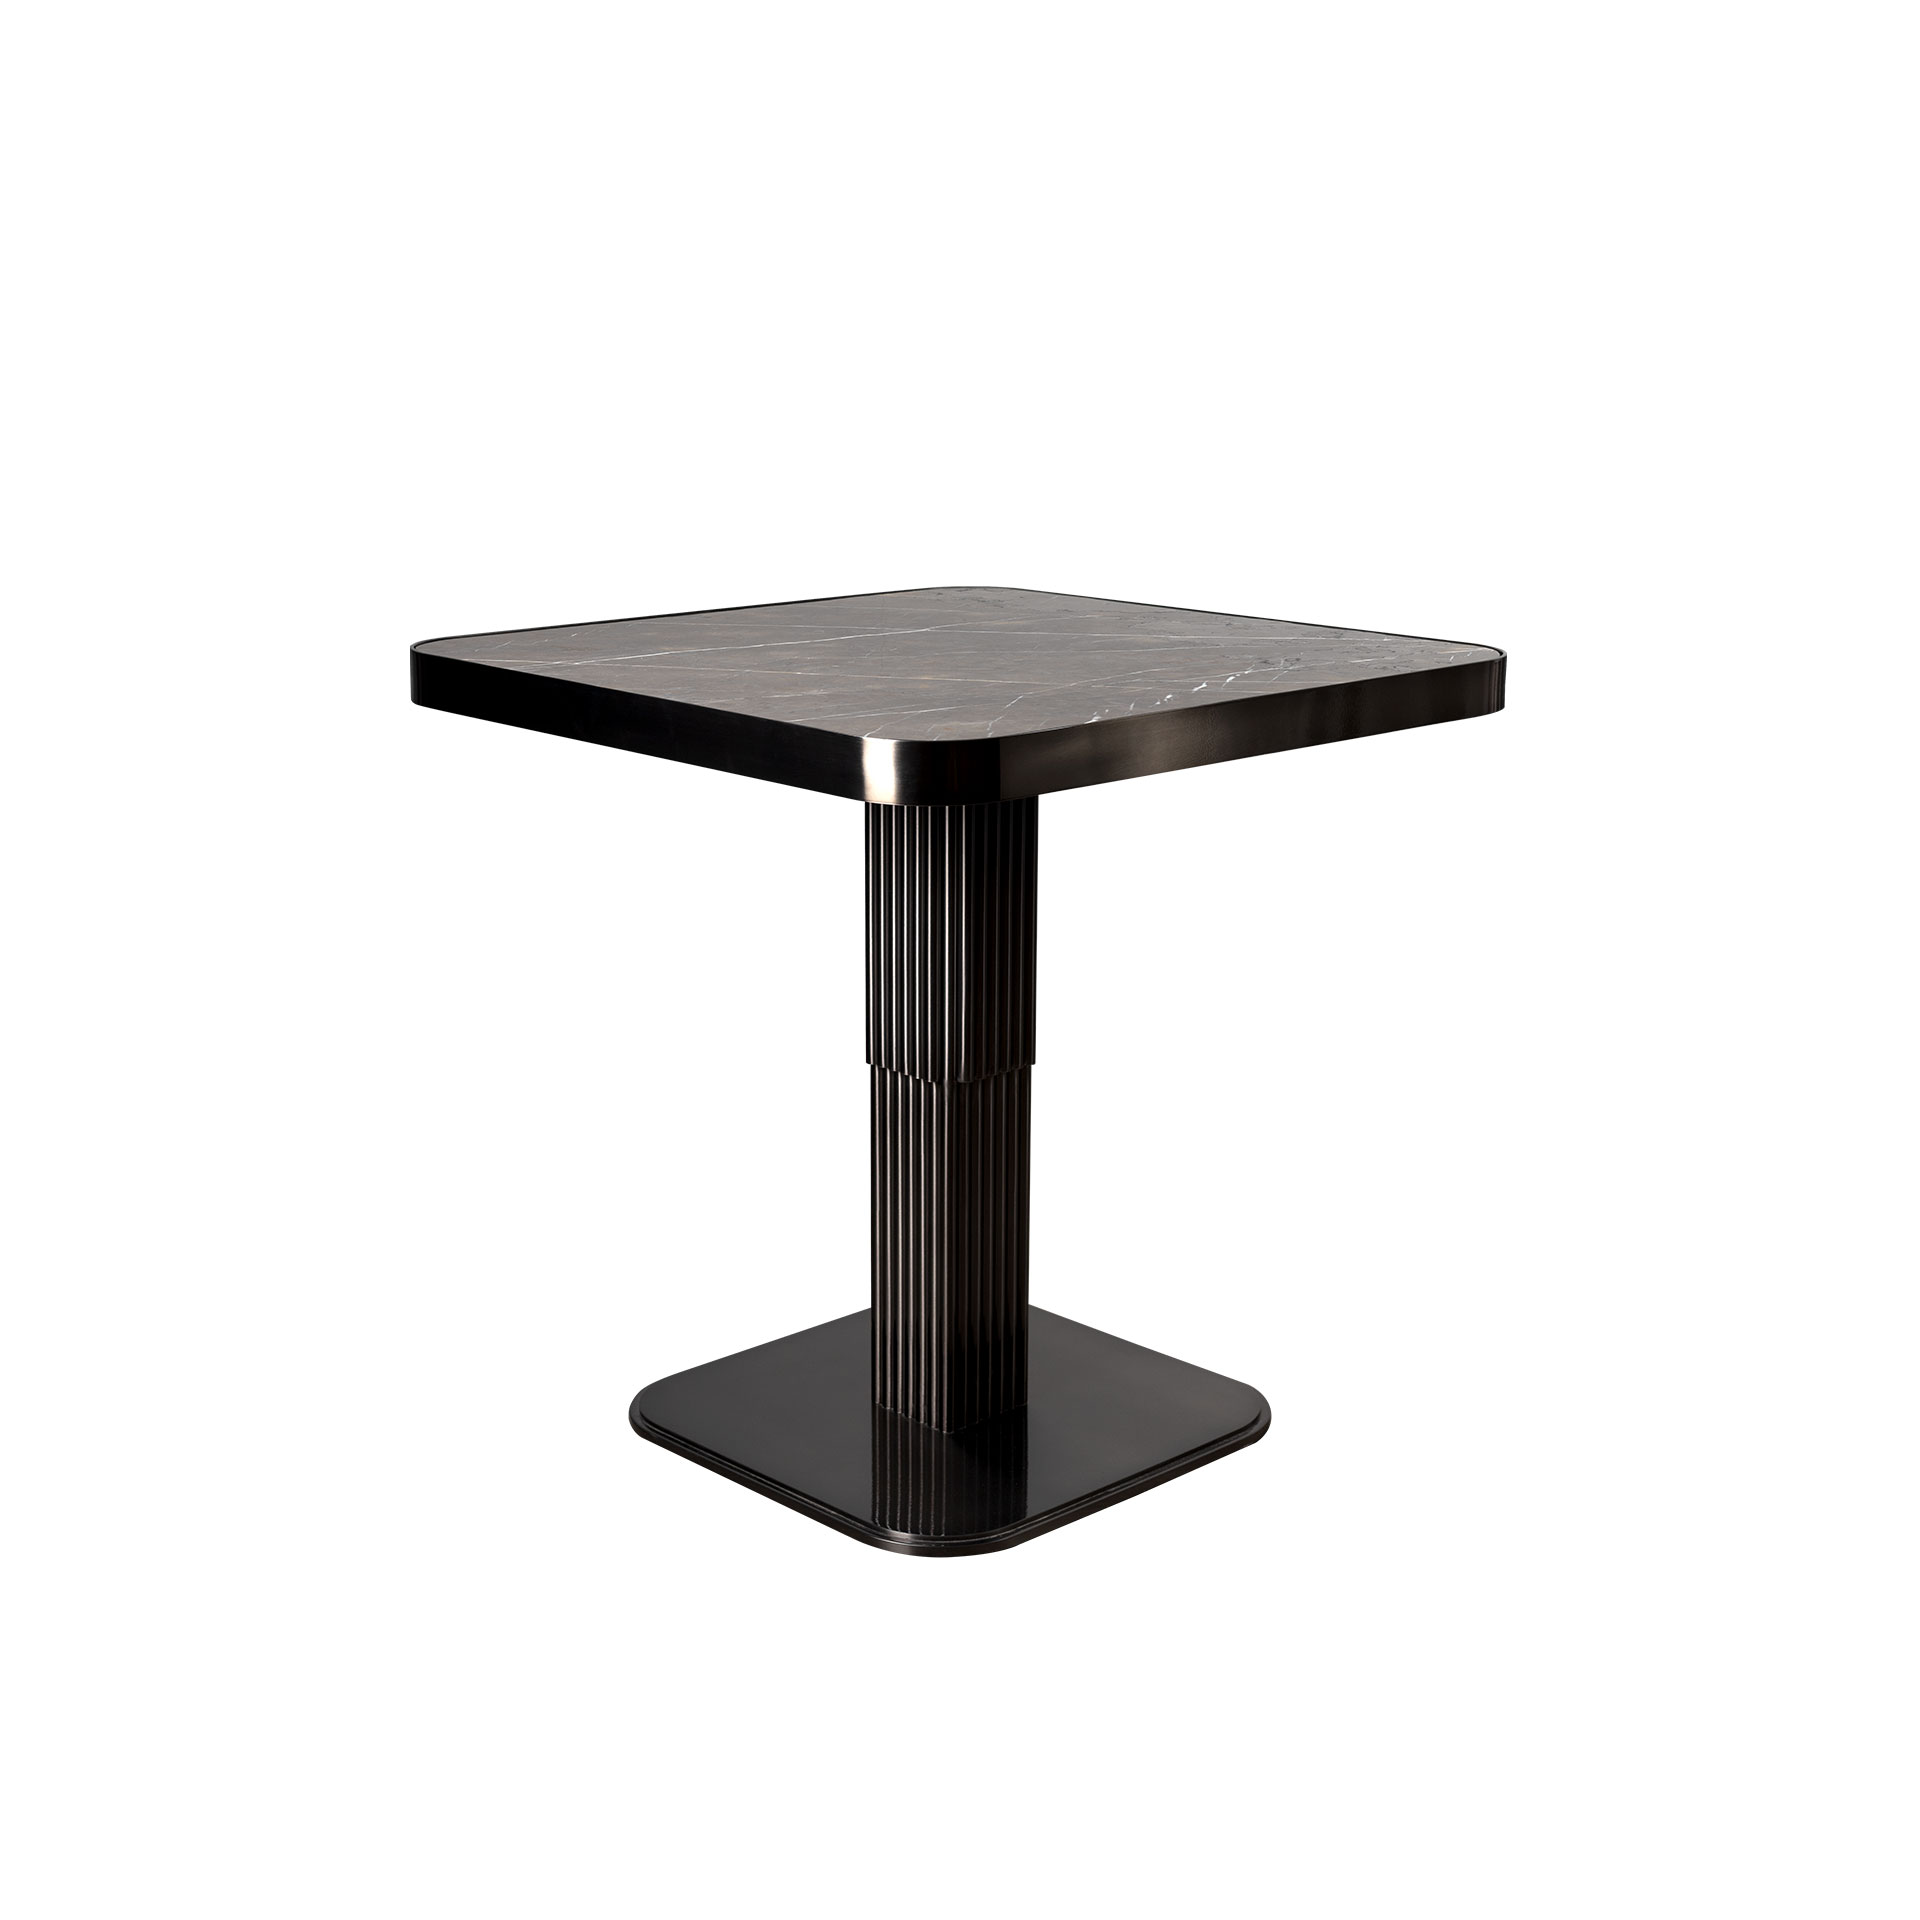 Staten dining table